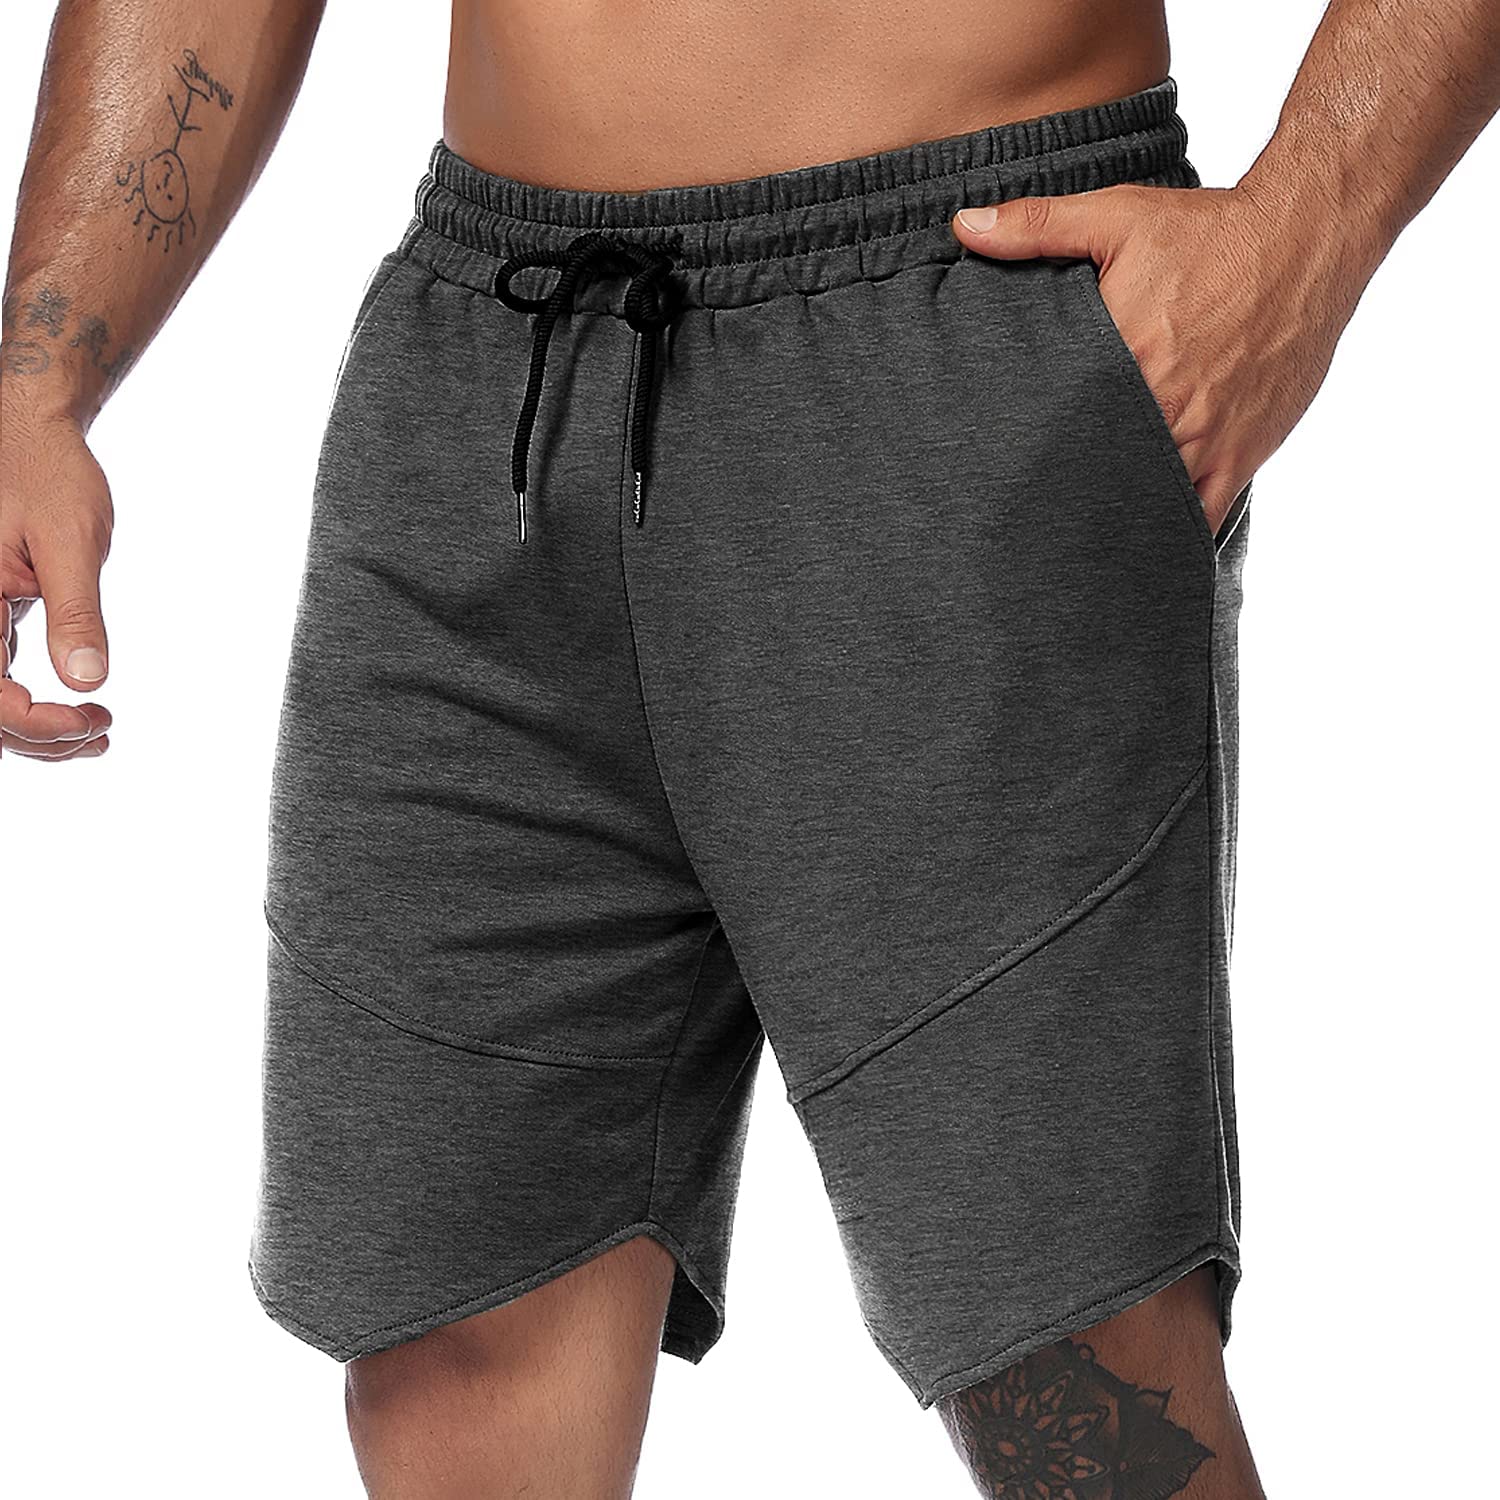 COOFANDY Men's Workout Gym Shorts Weightlifting Bodybuilding Squatting Fitness J